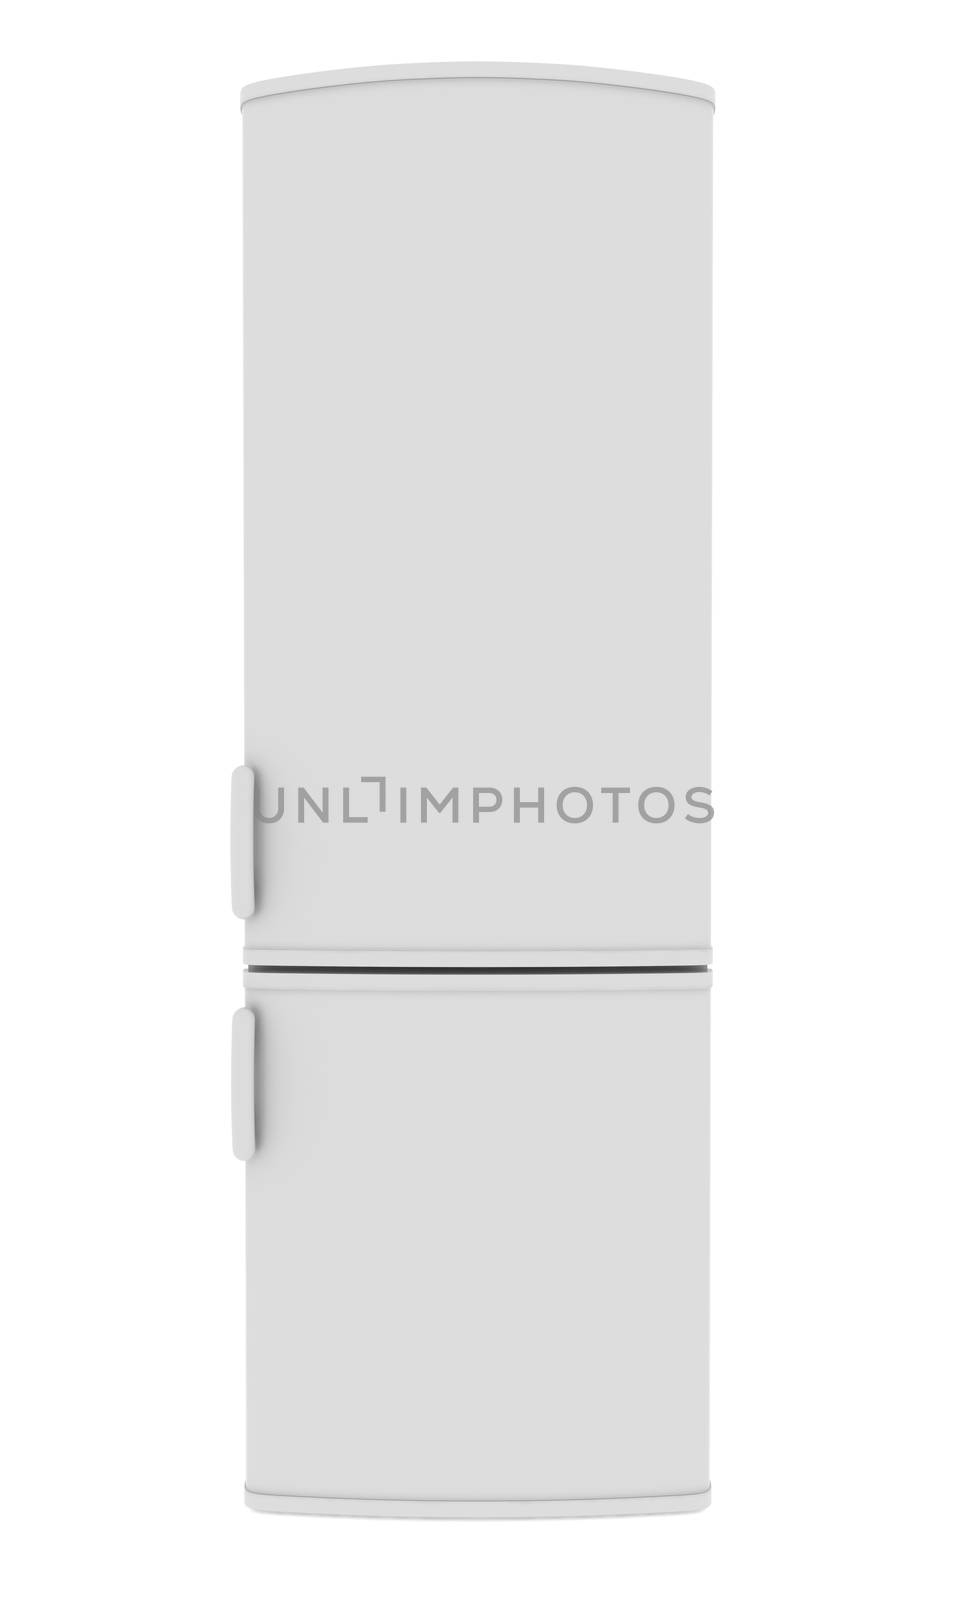 White refrigerator. Isolated render on a white background